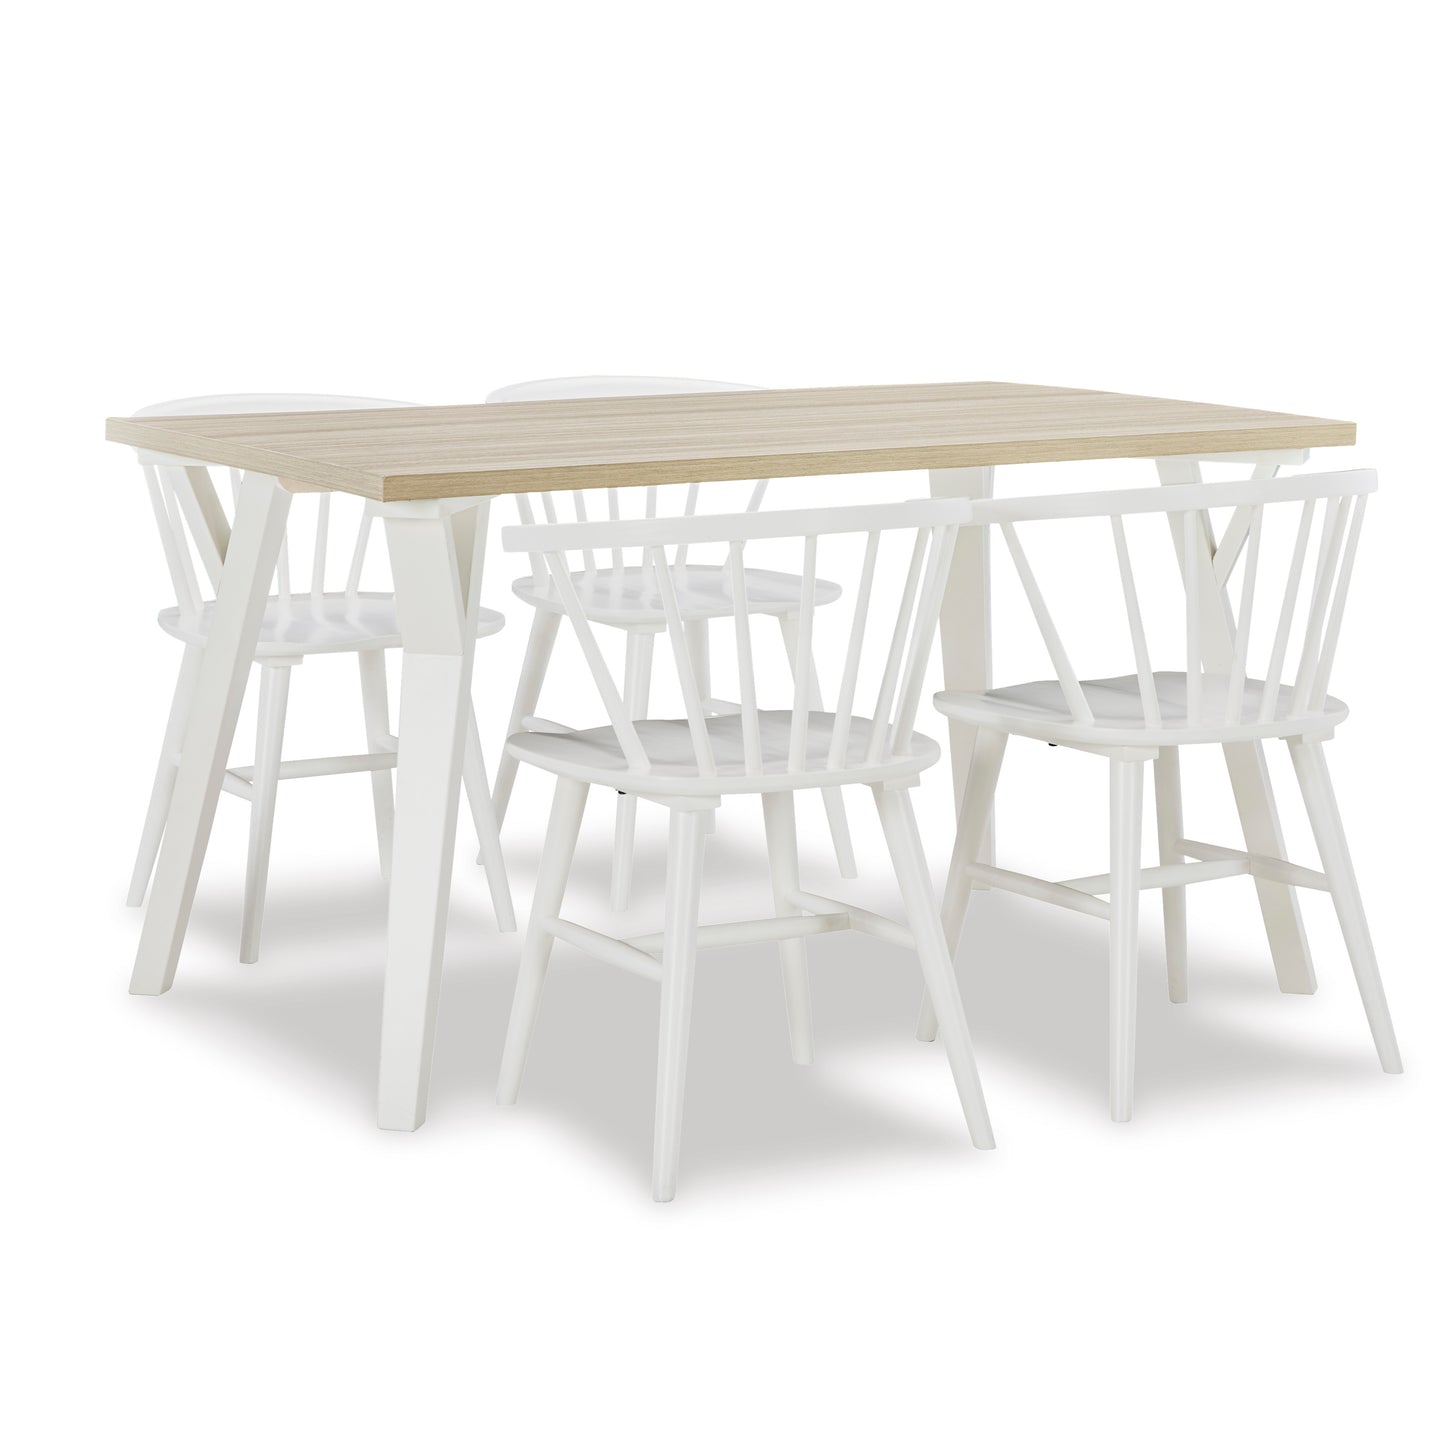 Alwynn White and Natural Wood 5-piece Dining Set, Dining Table with 4 Stylish Chairs